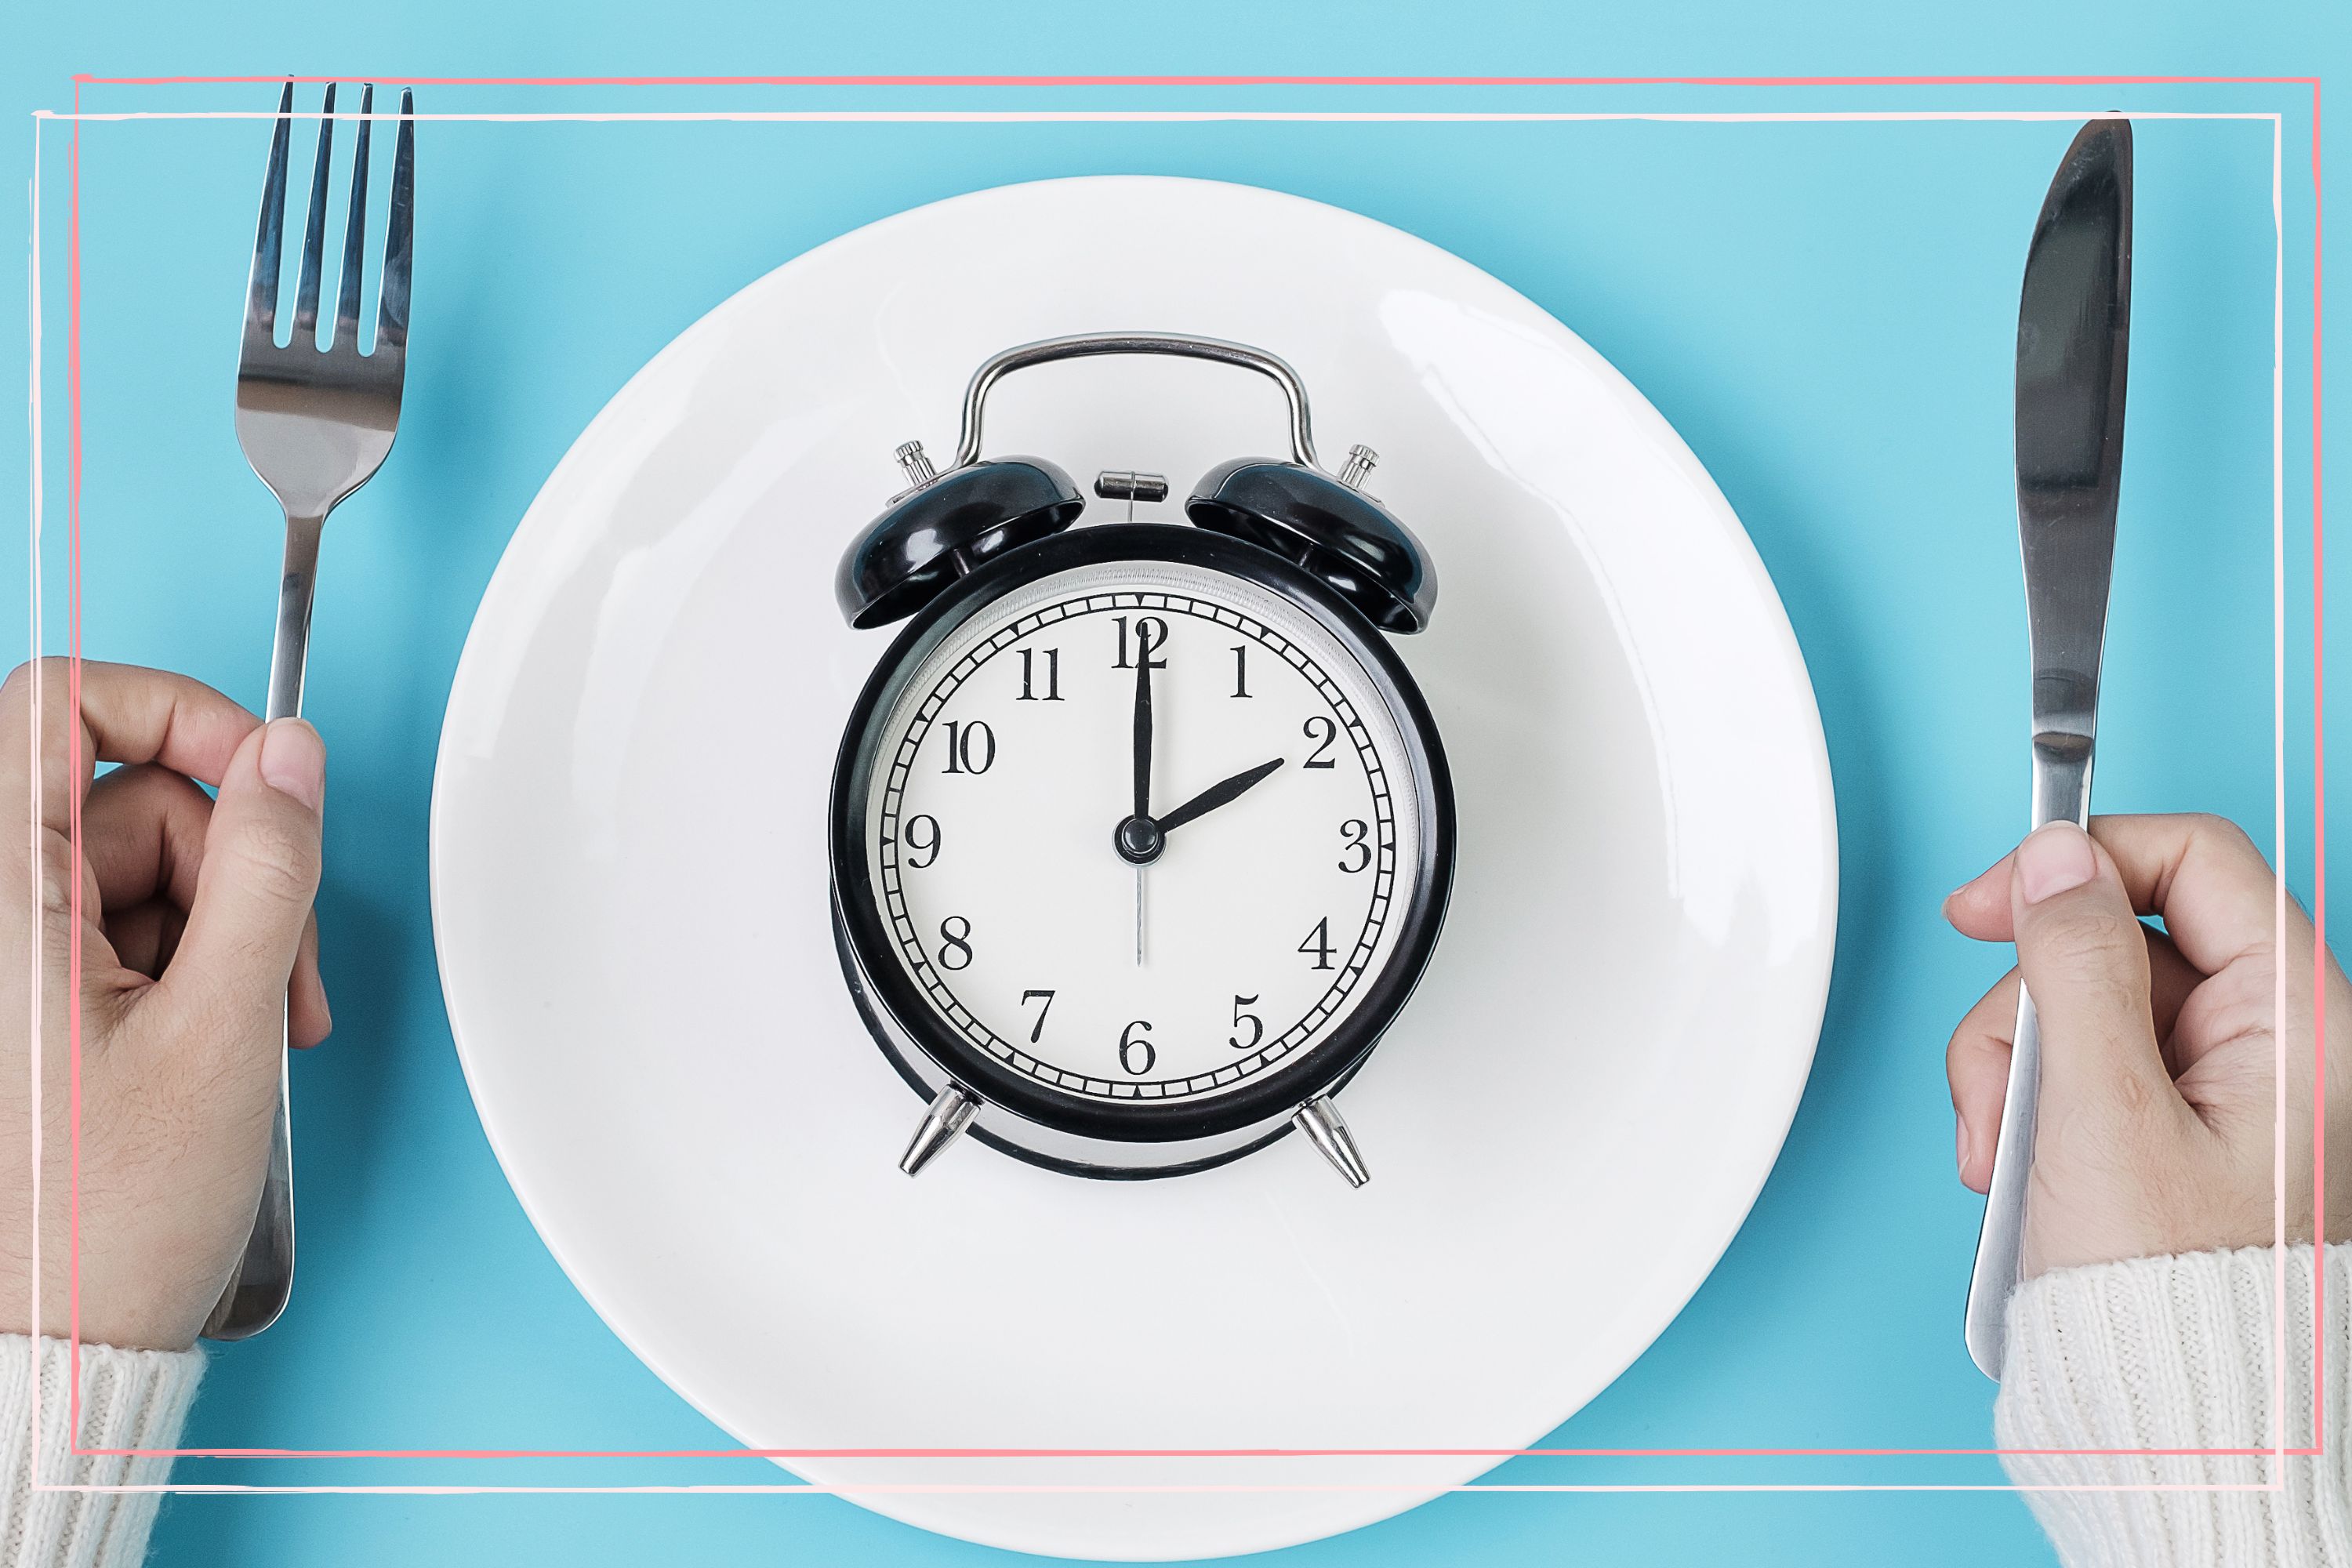 8 Hour Diet: Everything You Need To Know About Intermittent Fasting | Goodto